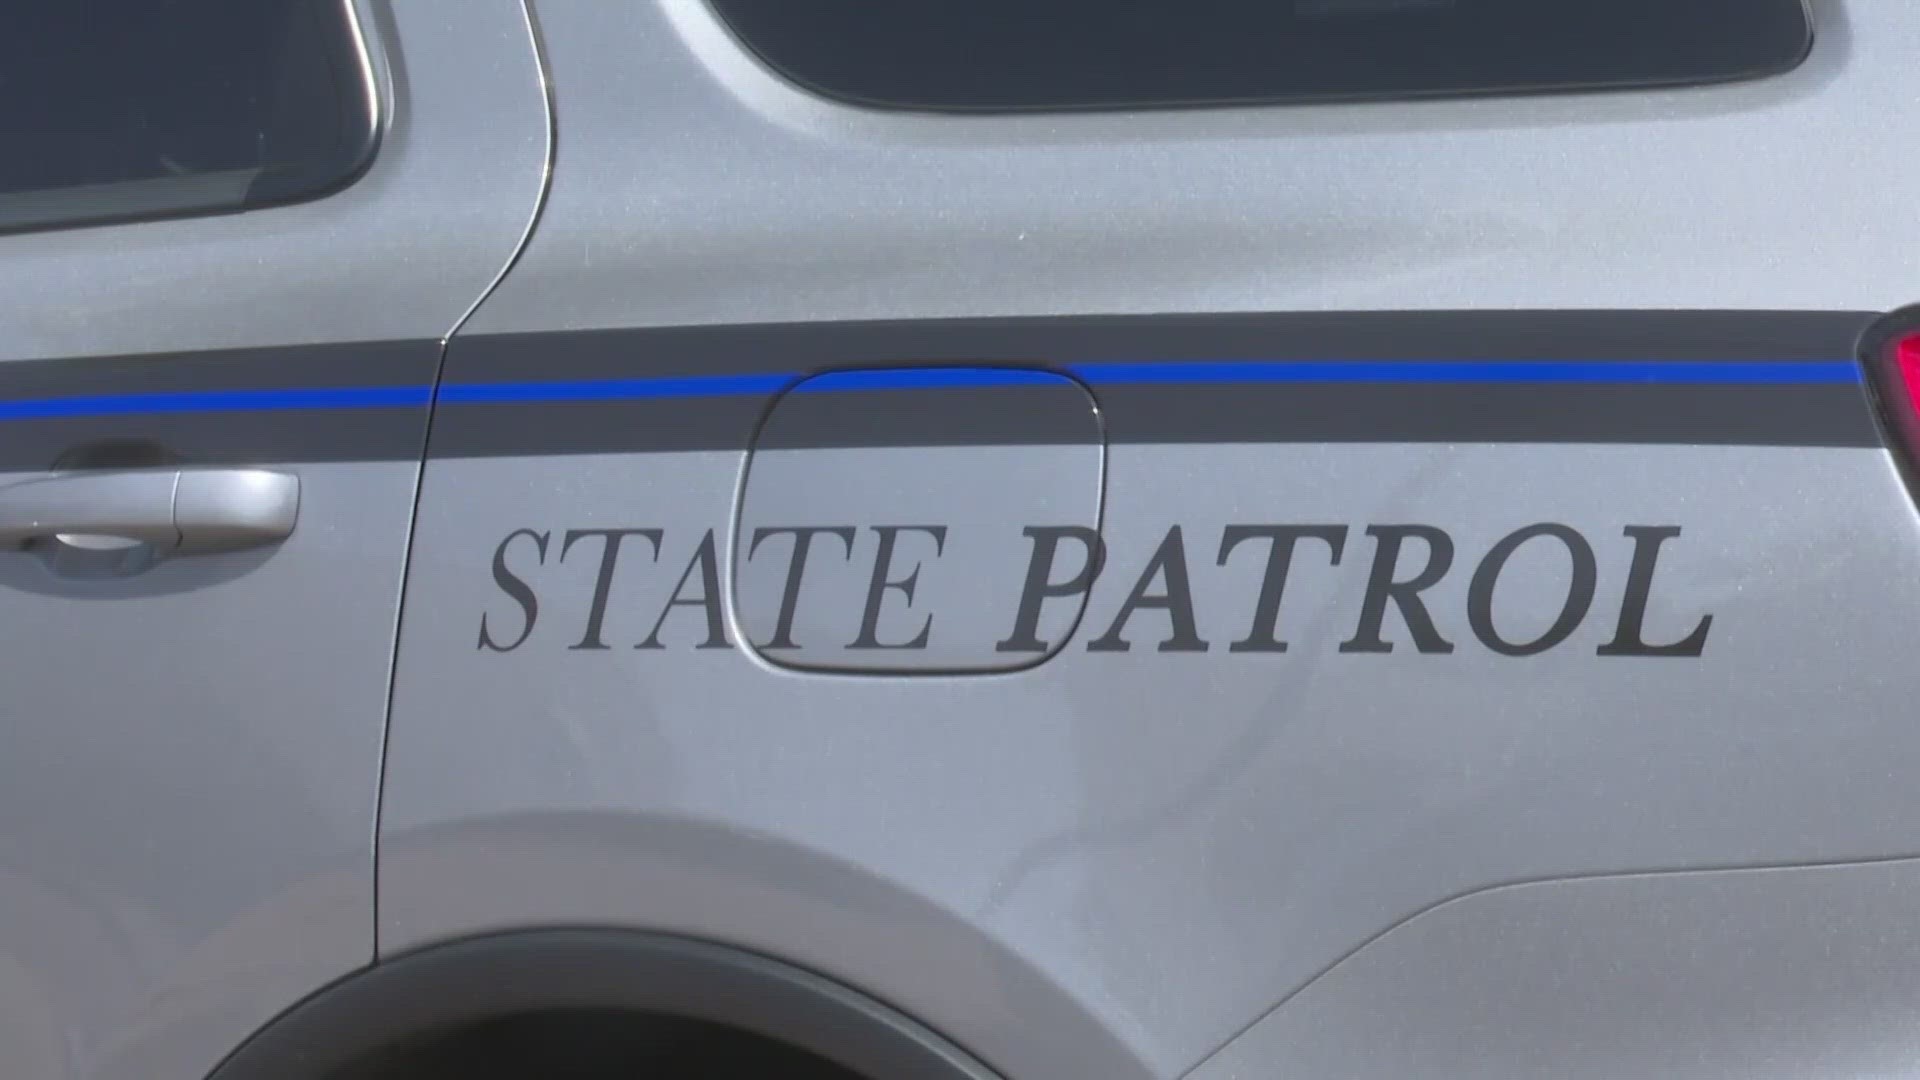 Over the last 18 months, Colorado State Patrol has lost more than 100 troopers. Some are retiring, while others are taking jobs with different agencies.